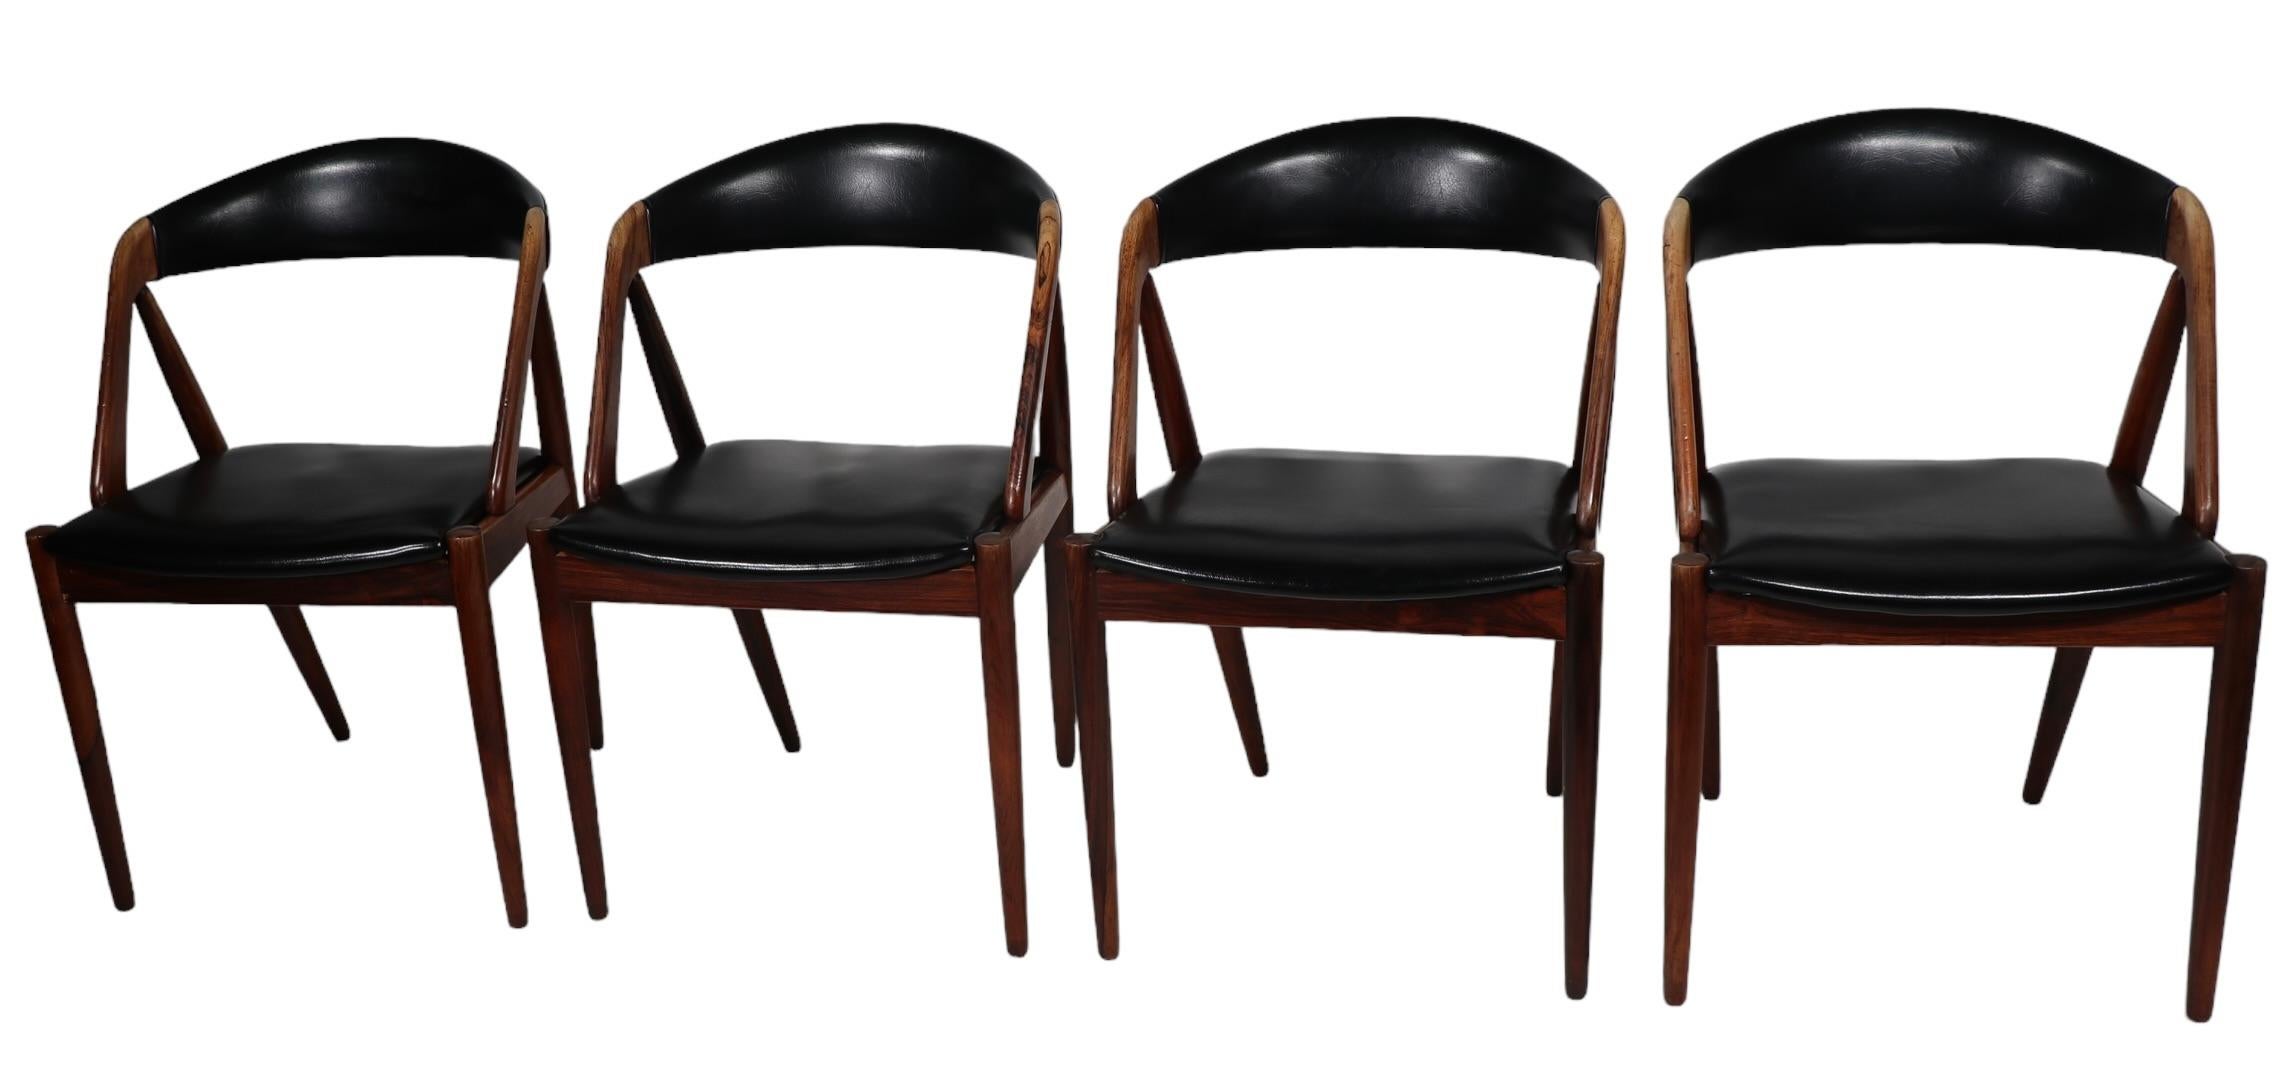  4 Rosewood Model 31 Danish Mid Century Modern Dining Chairs by Kai Kristiansen  For Sale 1